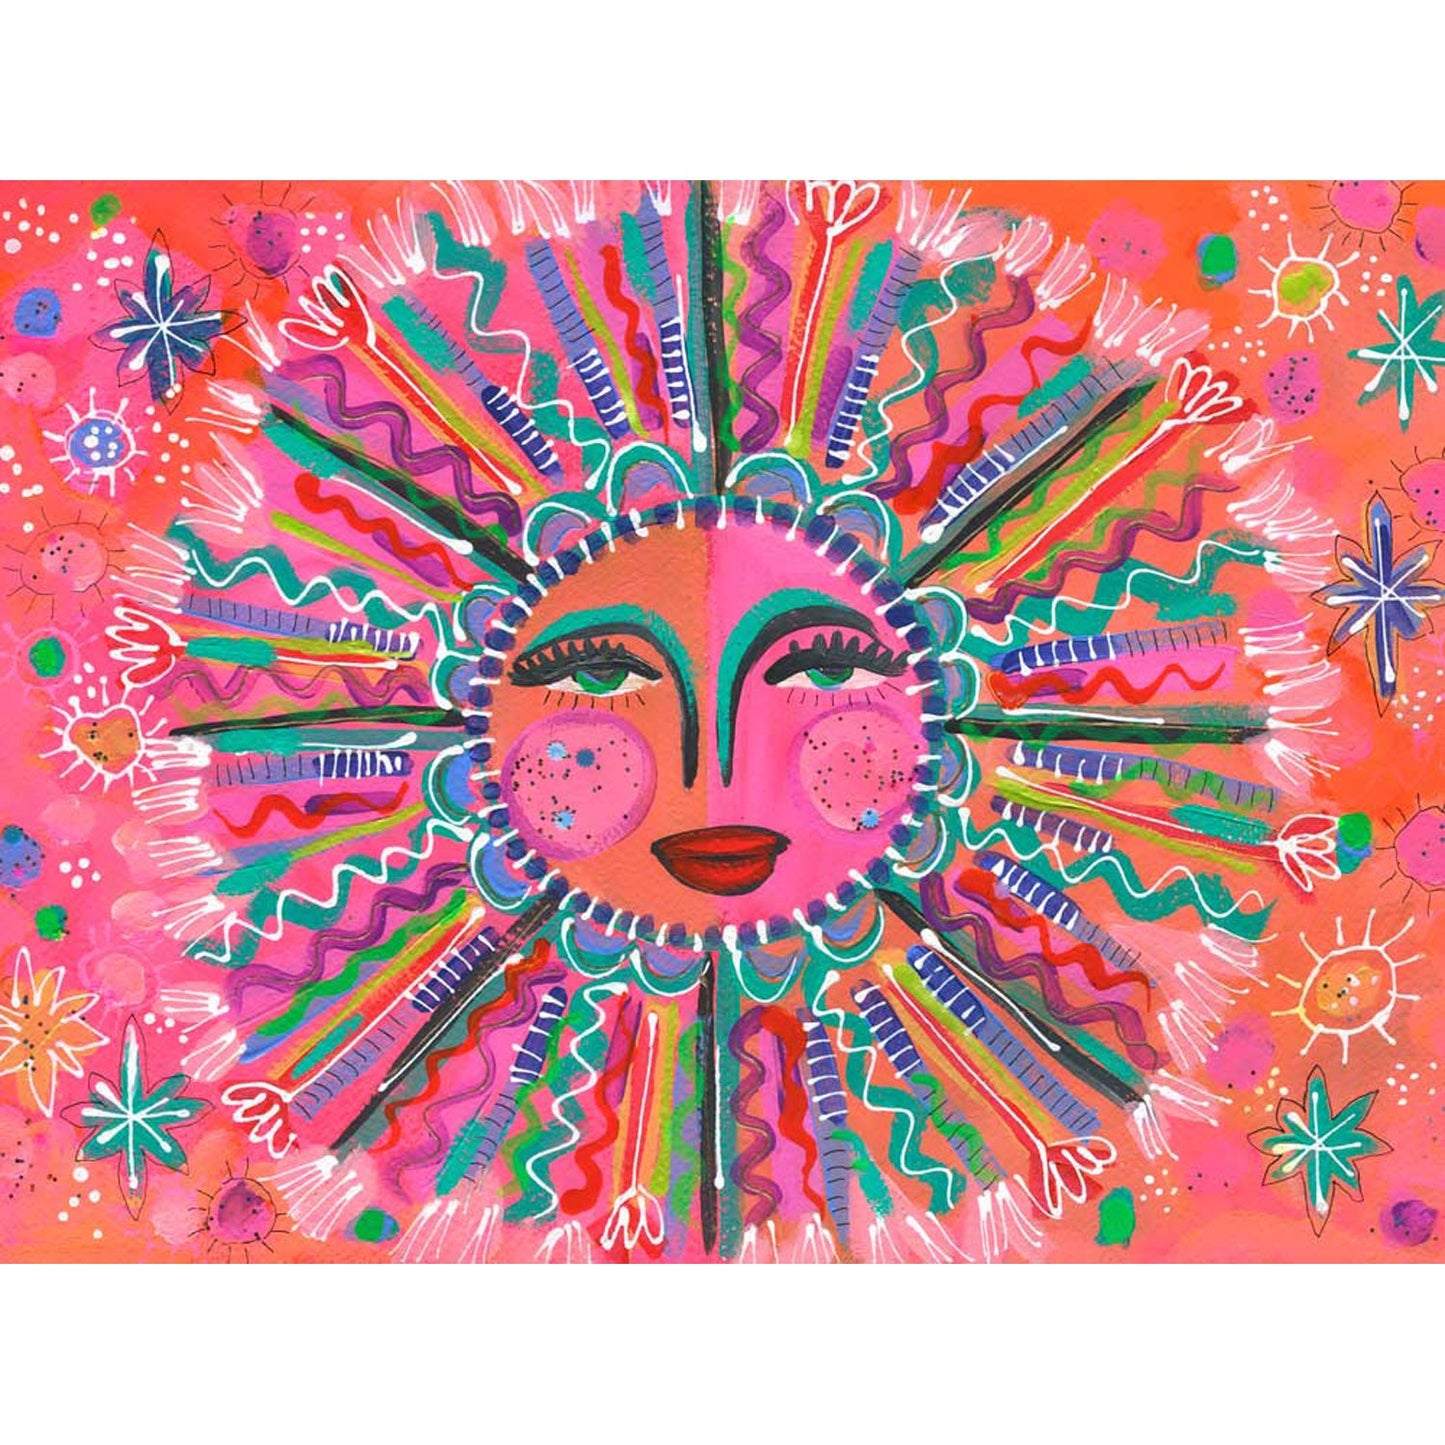 The Warmth Of The Sun Canvas Wall Art